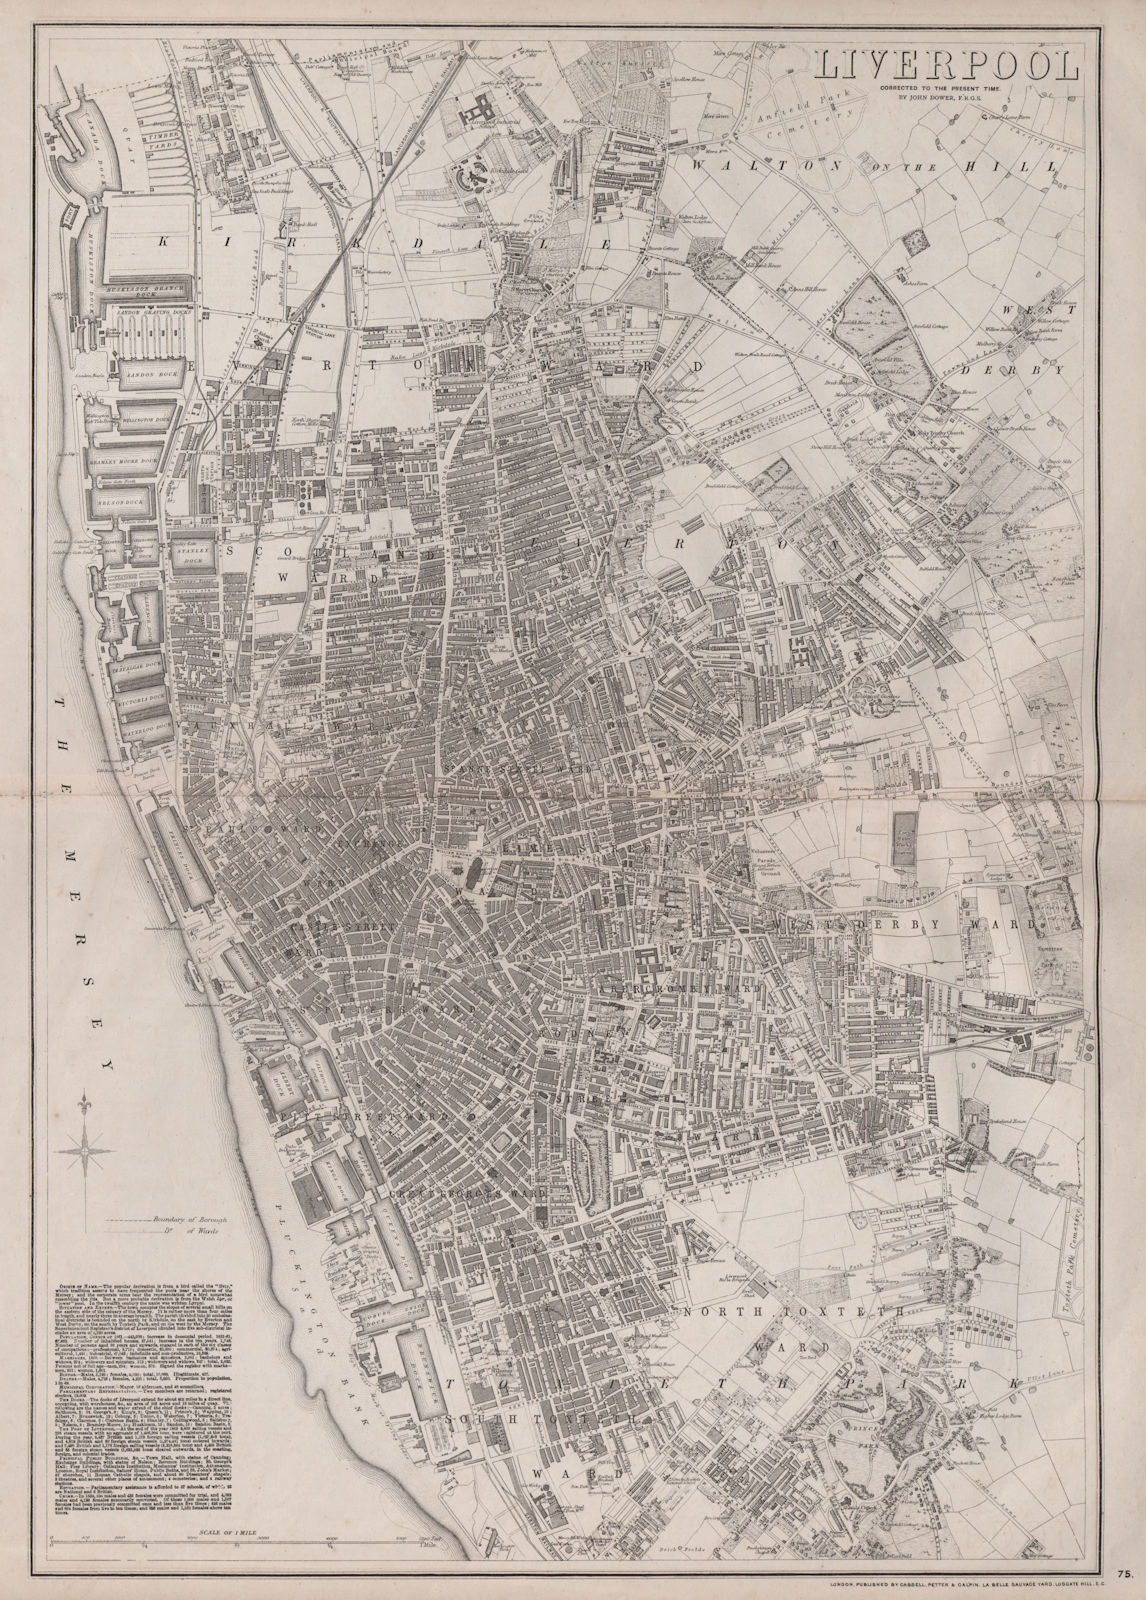 Associate Product LIVERPOOL. Large town/city plan by BR DAVIES for the Dispatch Atlas 1868 map